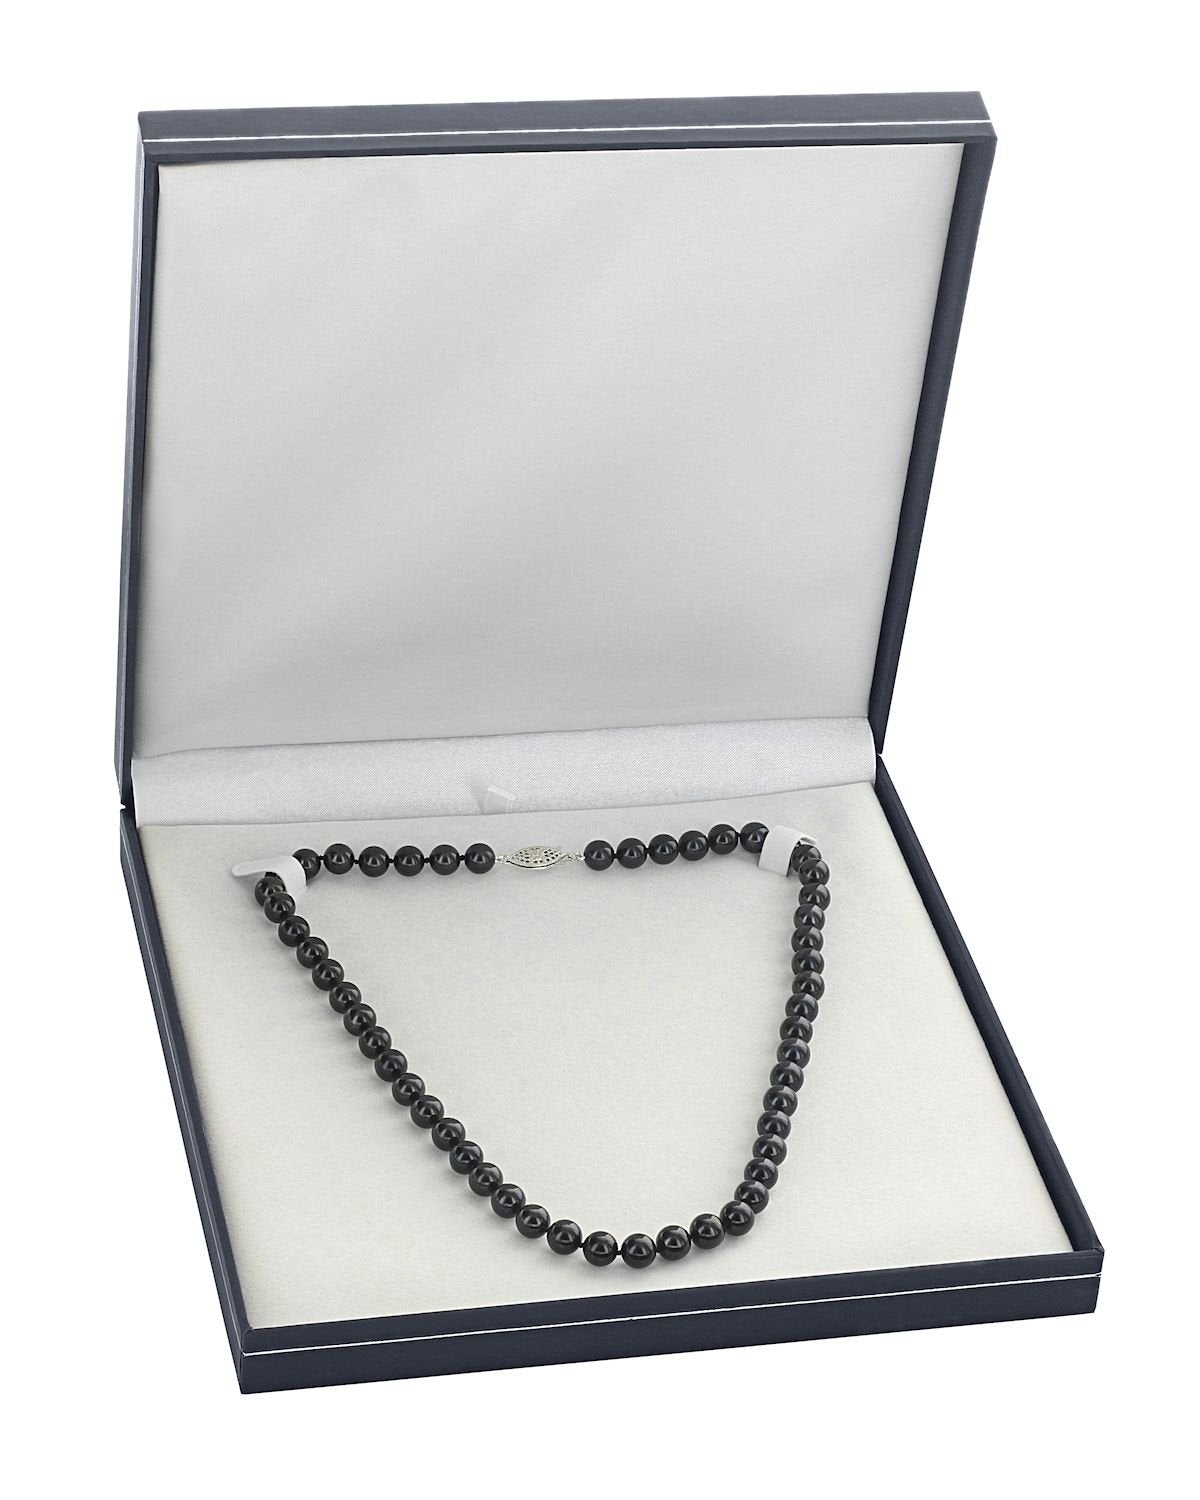 7.5-8.0mm Japanese Akoya Black Pearl Necklace- AAA Quality - Third Image